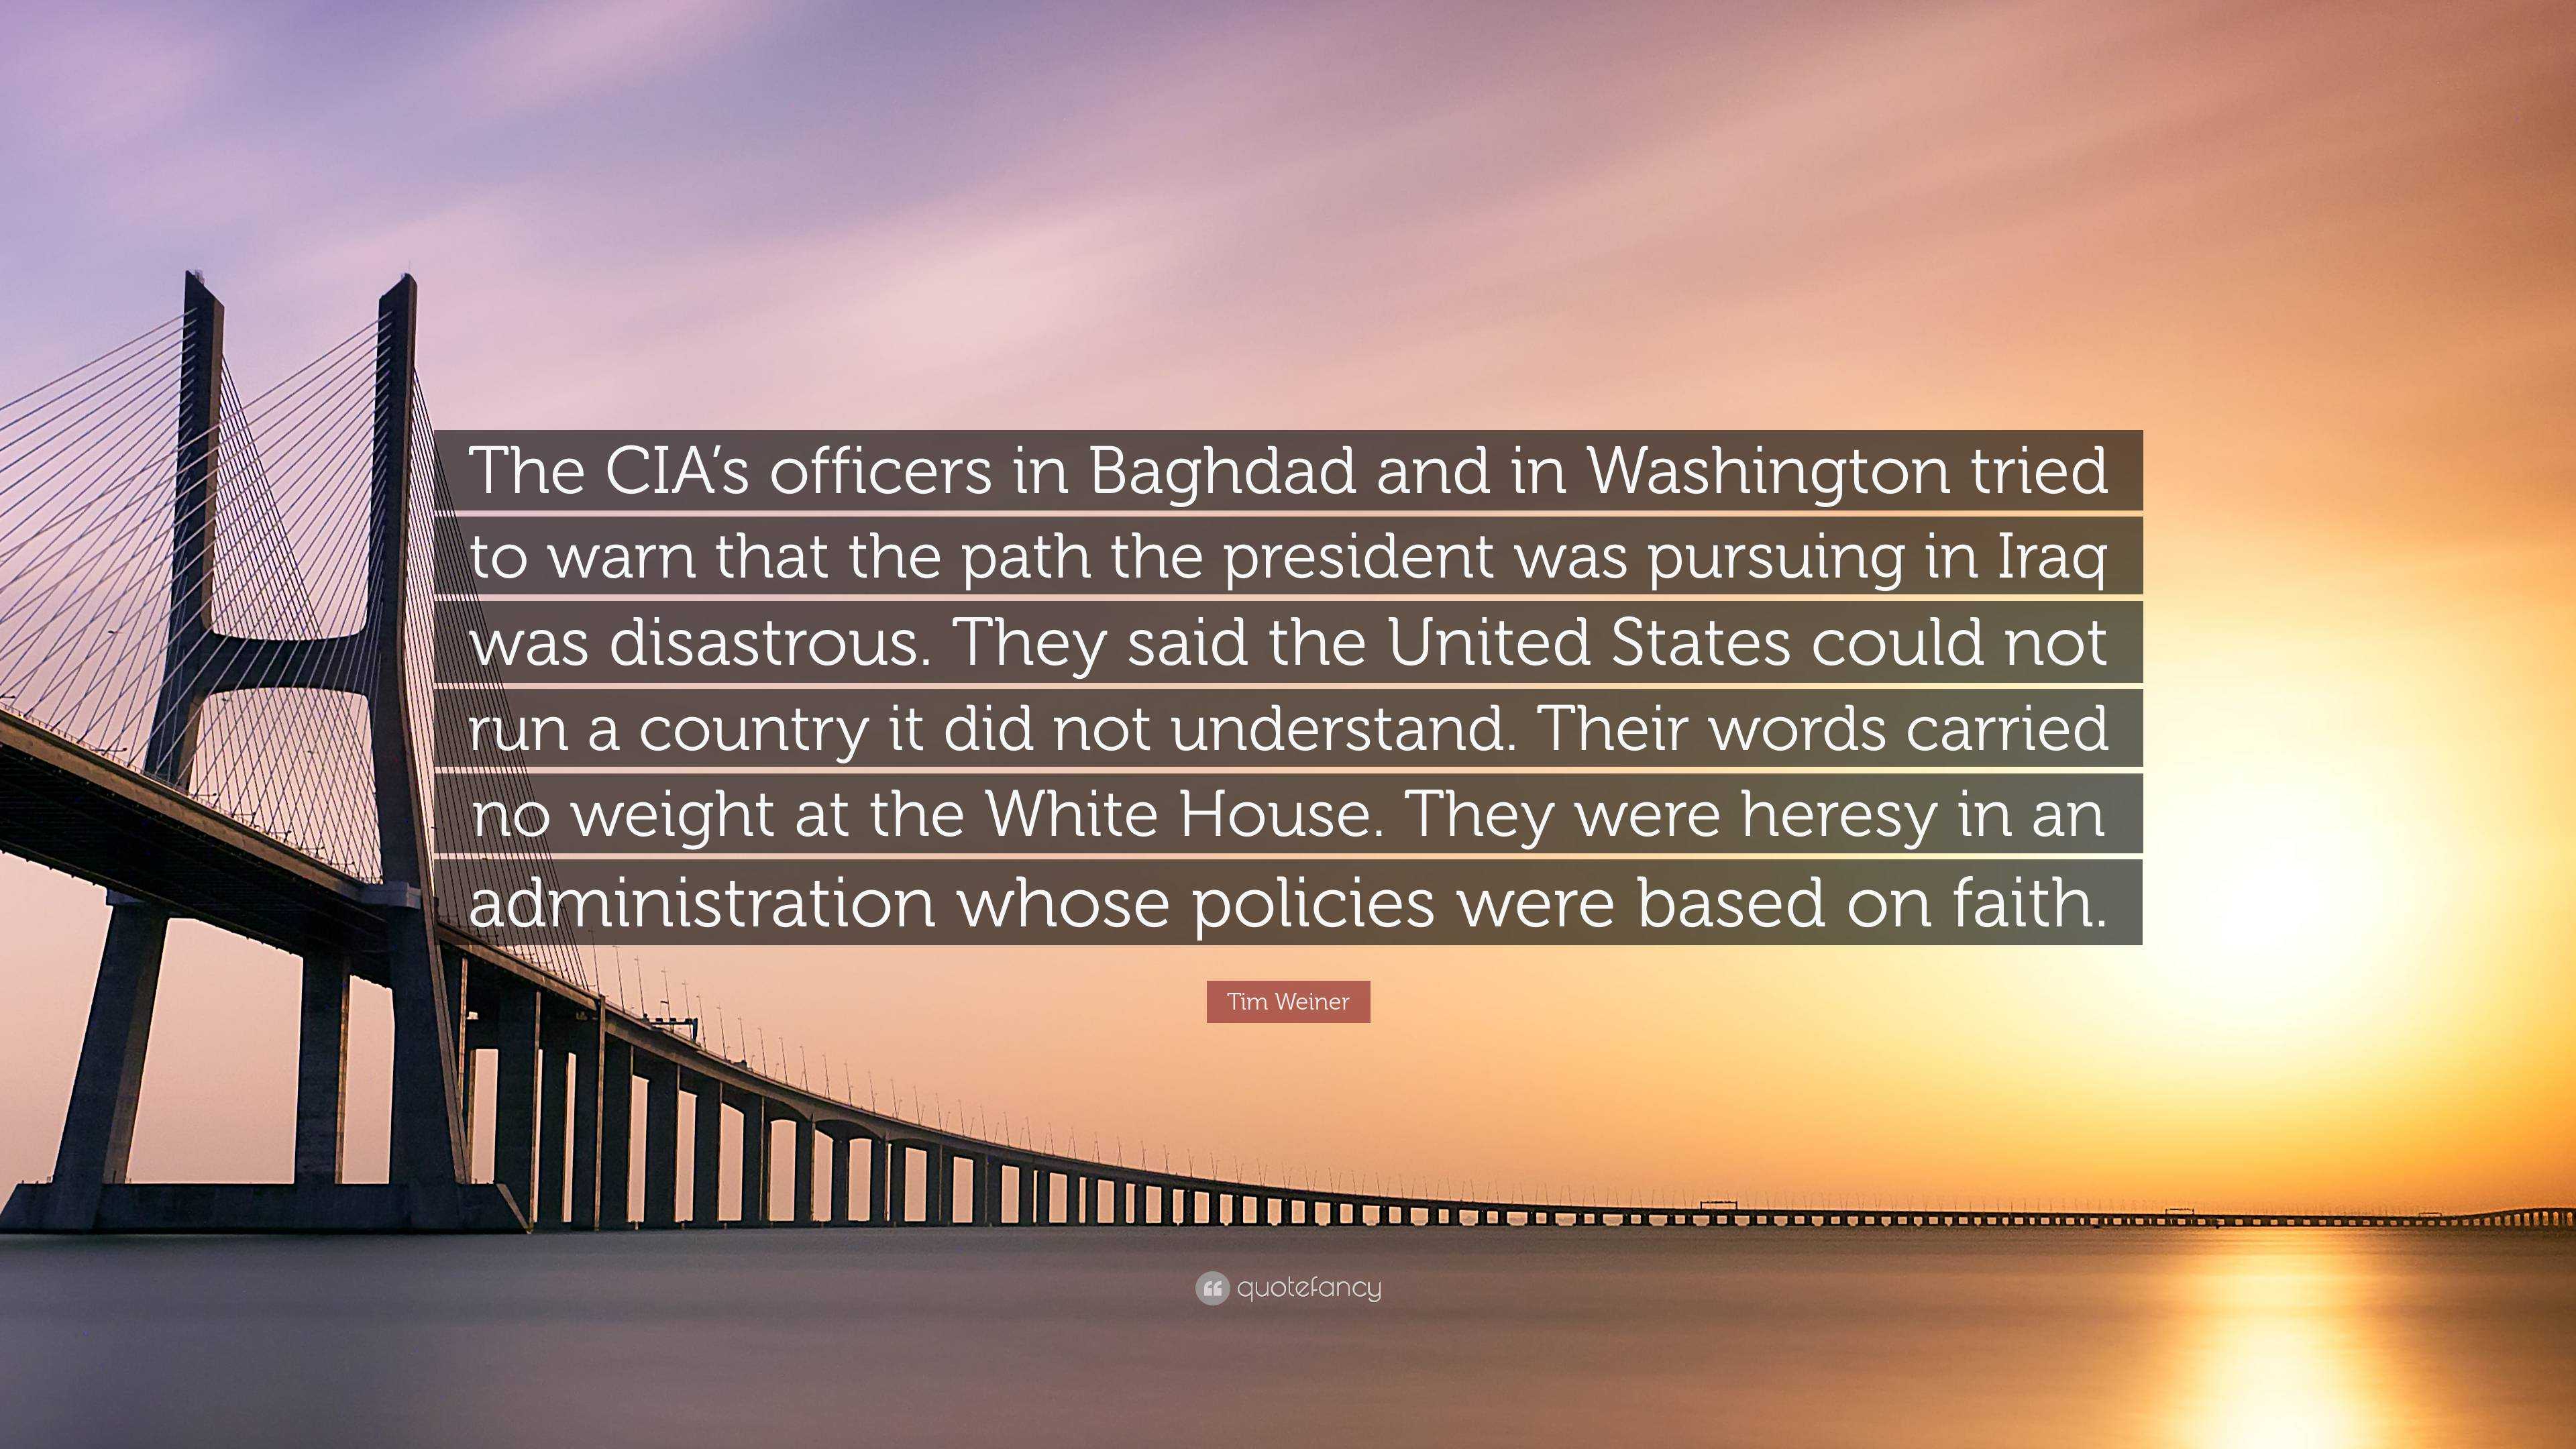 Tim Weiner Quote: “The CIA's officers in Baghdad and in Washington tried to that the path the president pursuing in Iraq disas...”